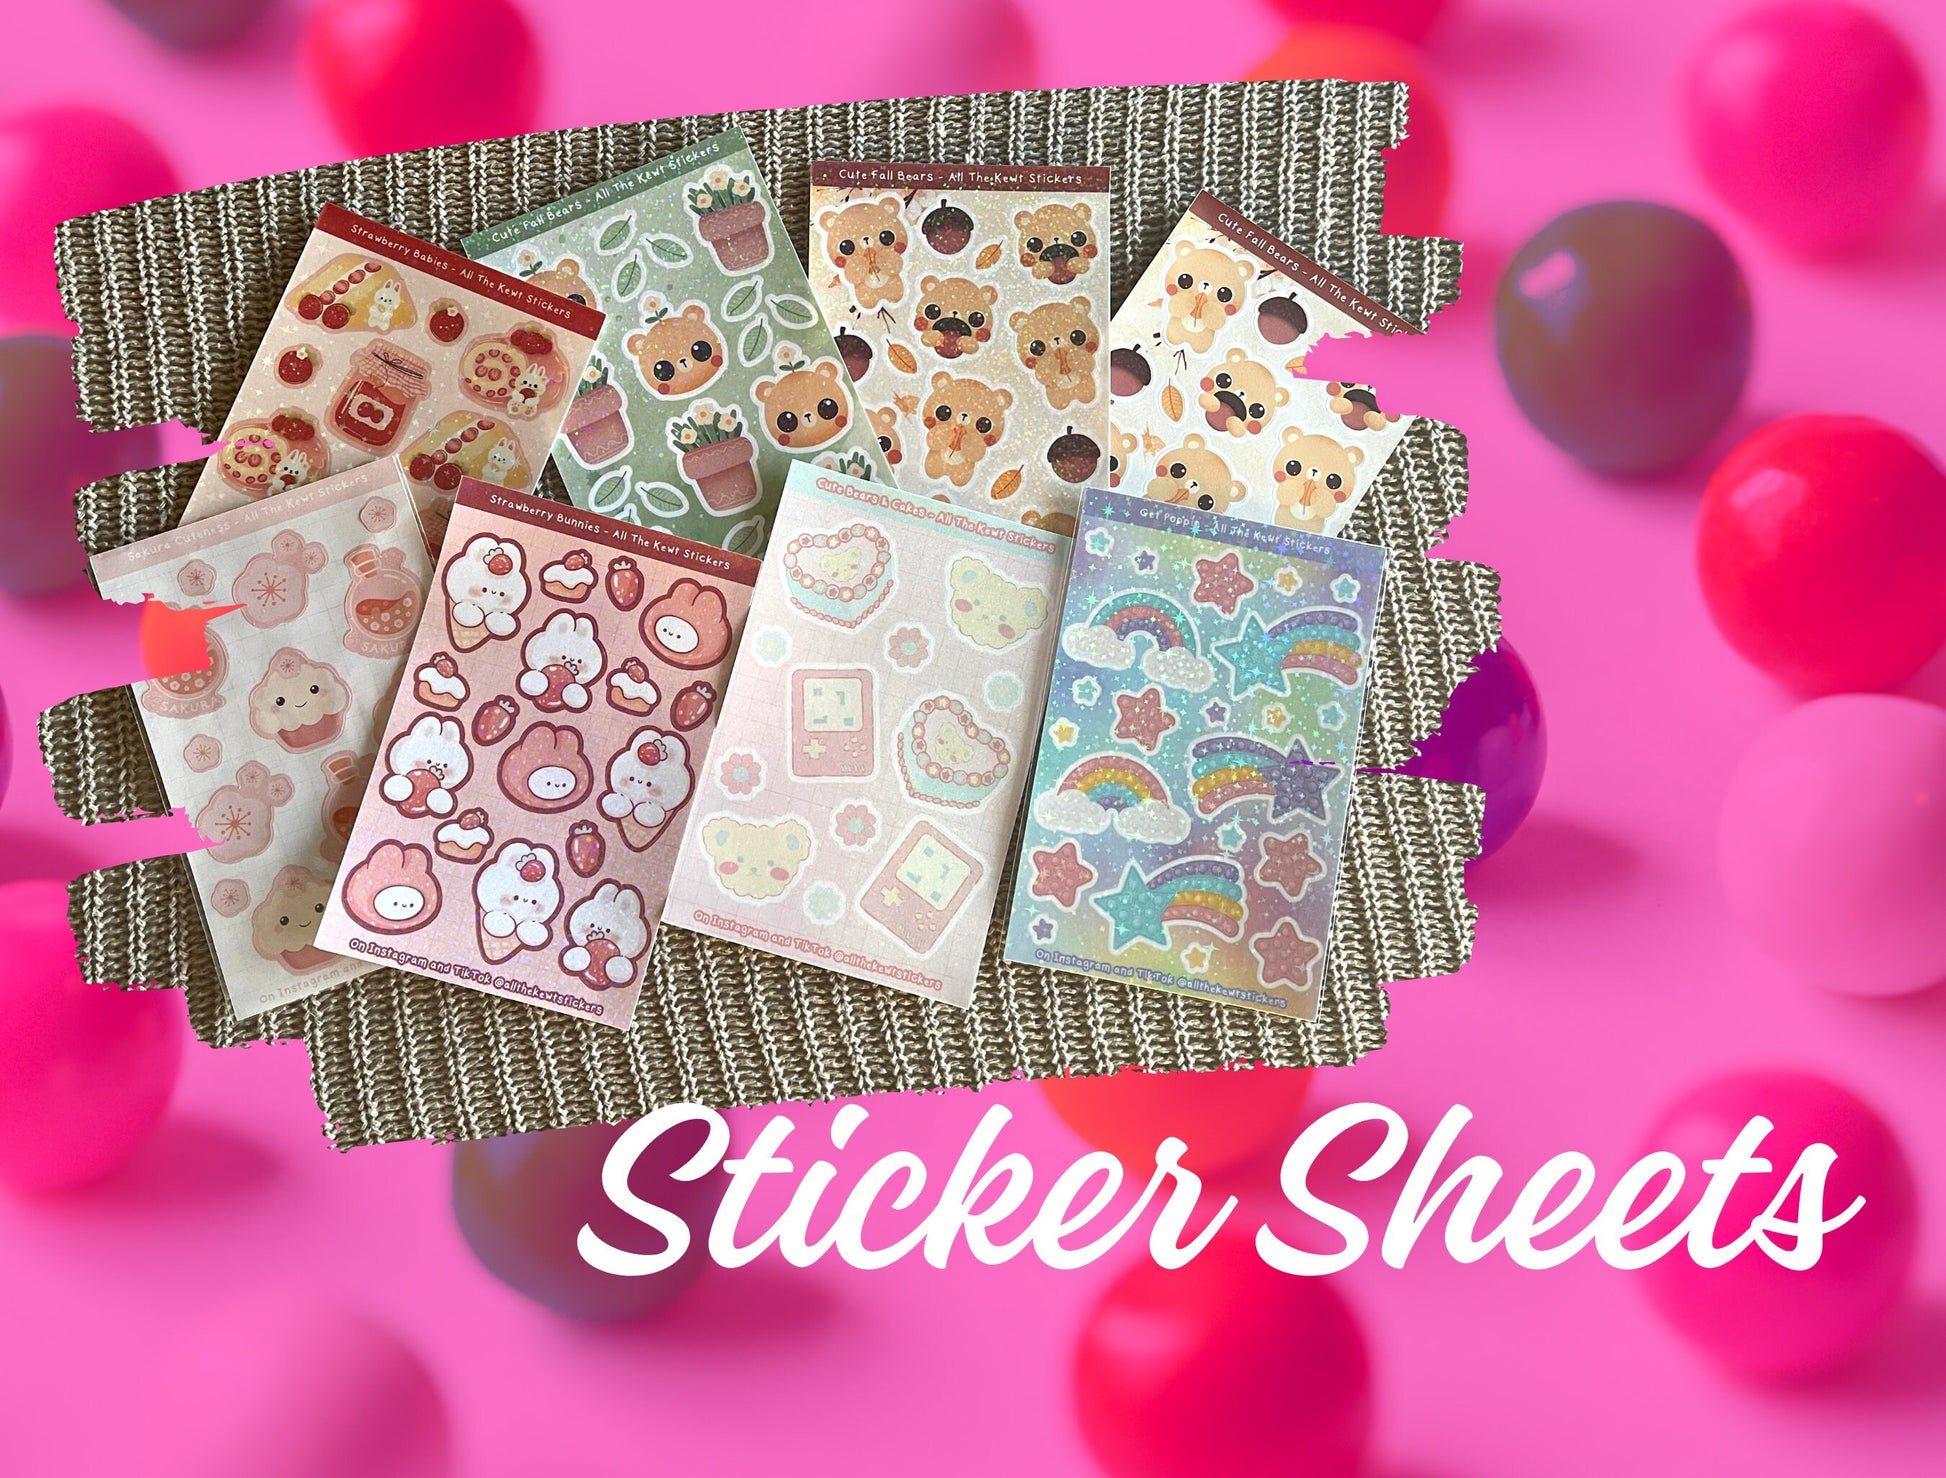 Random Kawaii Sticker Vending Machine Grab Bag, Purchase Spins and Get Stickers, Kawaii Stickers, Sticker Flakes, Cute Mystery Stickers